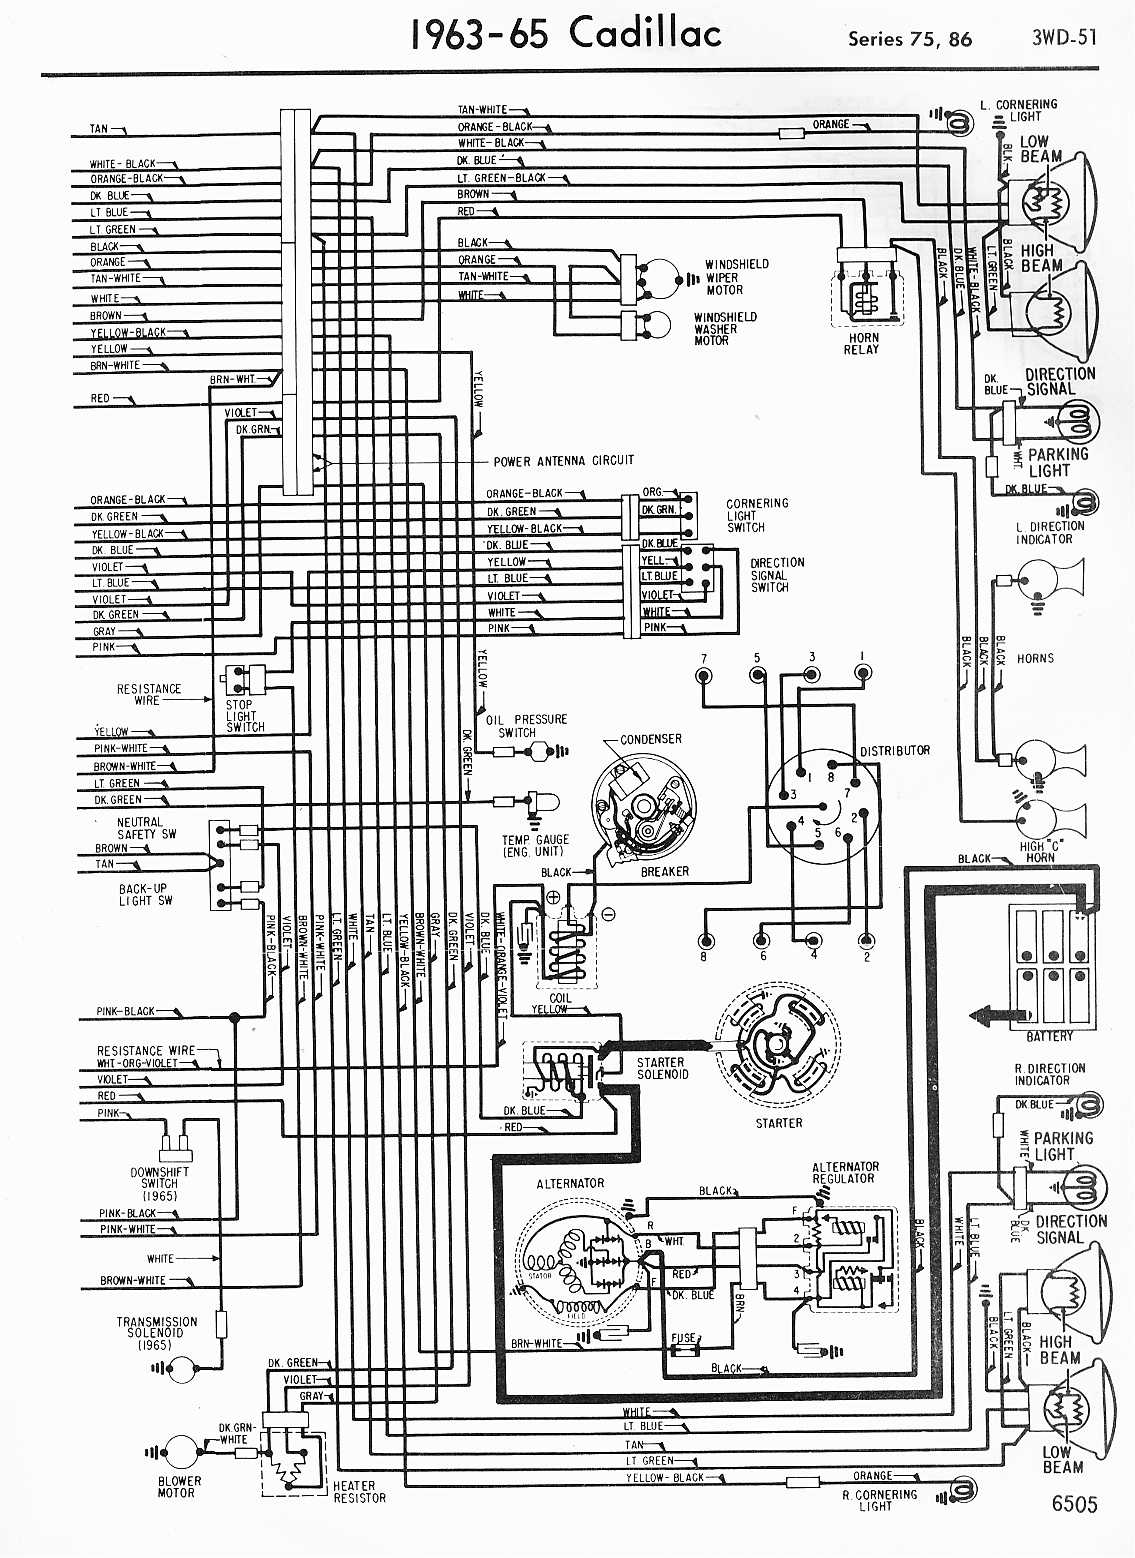 File: Wiring Diagram For 1949 Chevy Truck